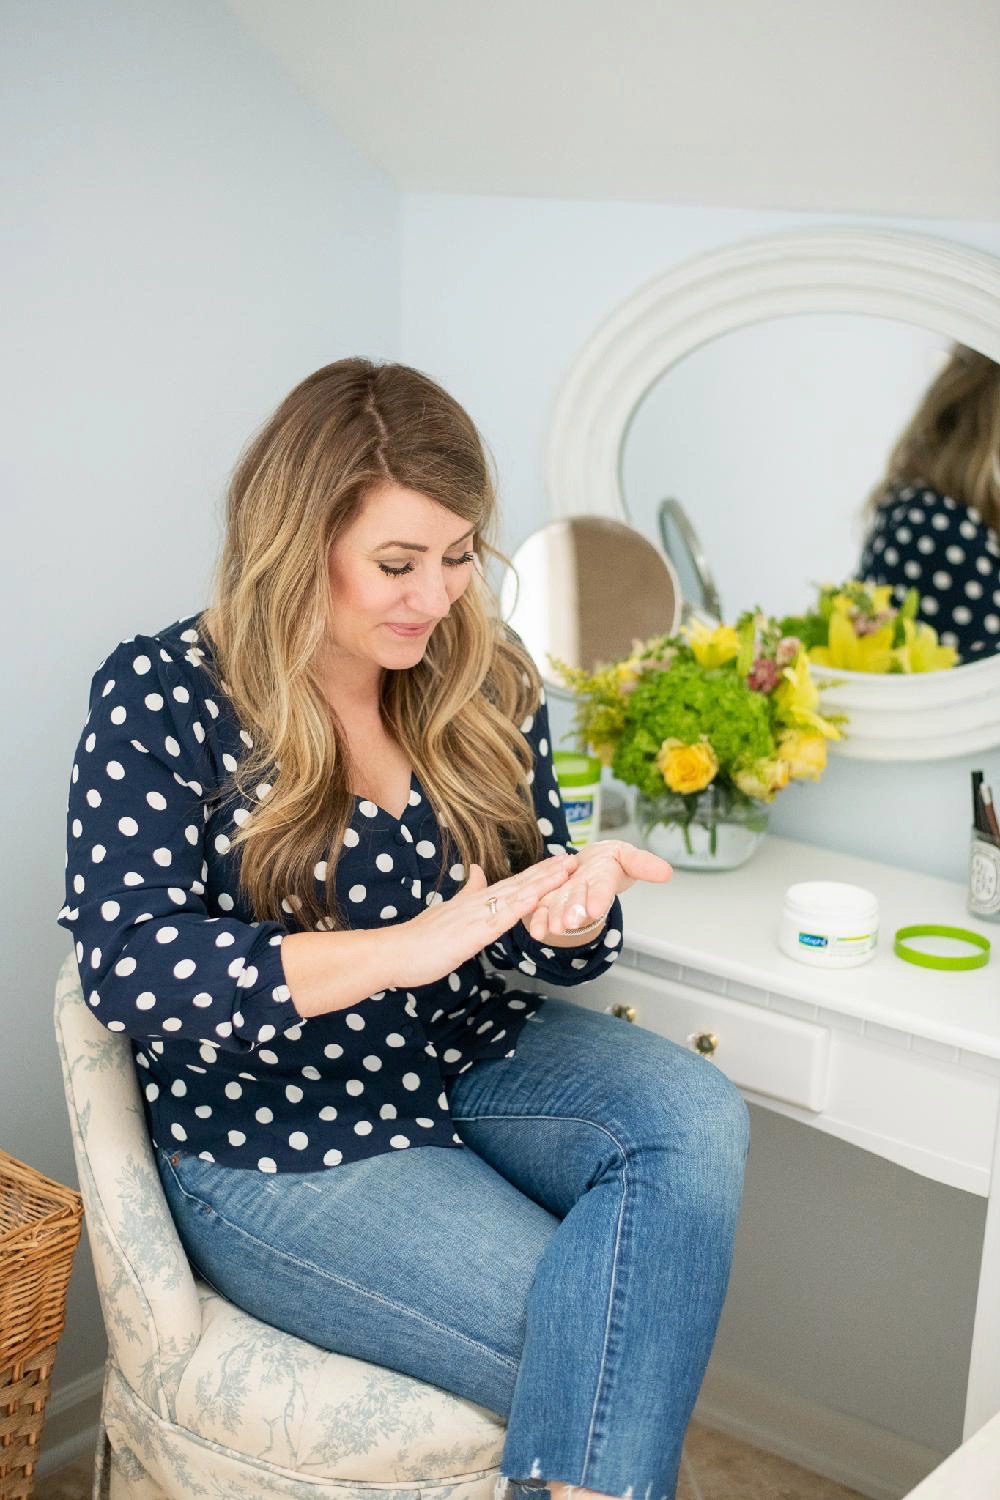 Summer Skin Care Tips with Cetaphil by popular North Carolina beauty blog, Coffee Beans and Bobby Pins: image of woman sitting down at her vanity and applying Cetaphil Moisturizing Cream to her hands.